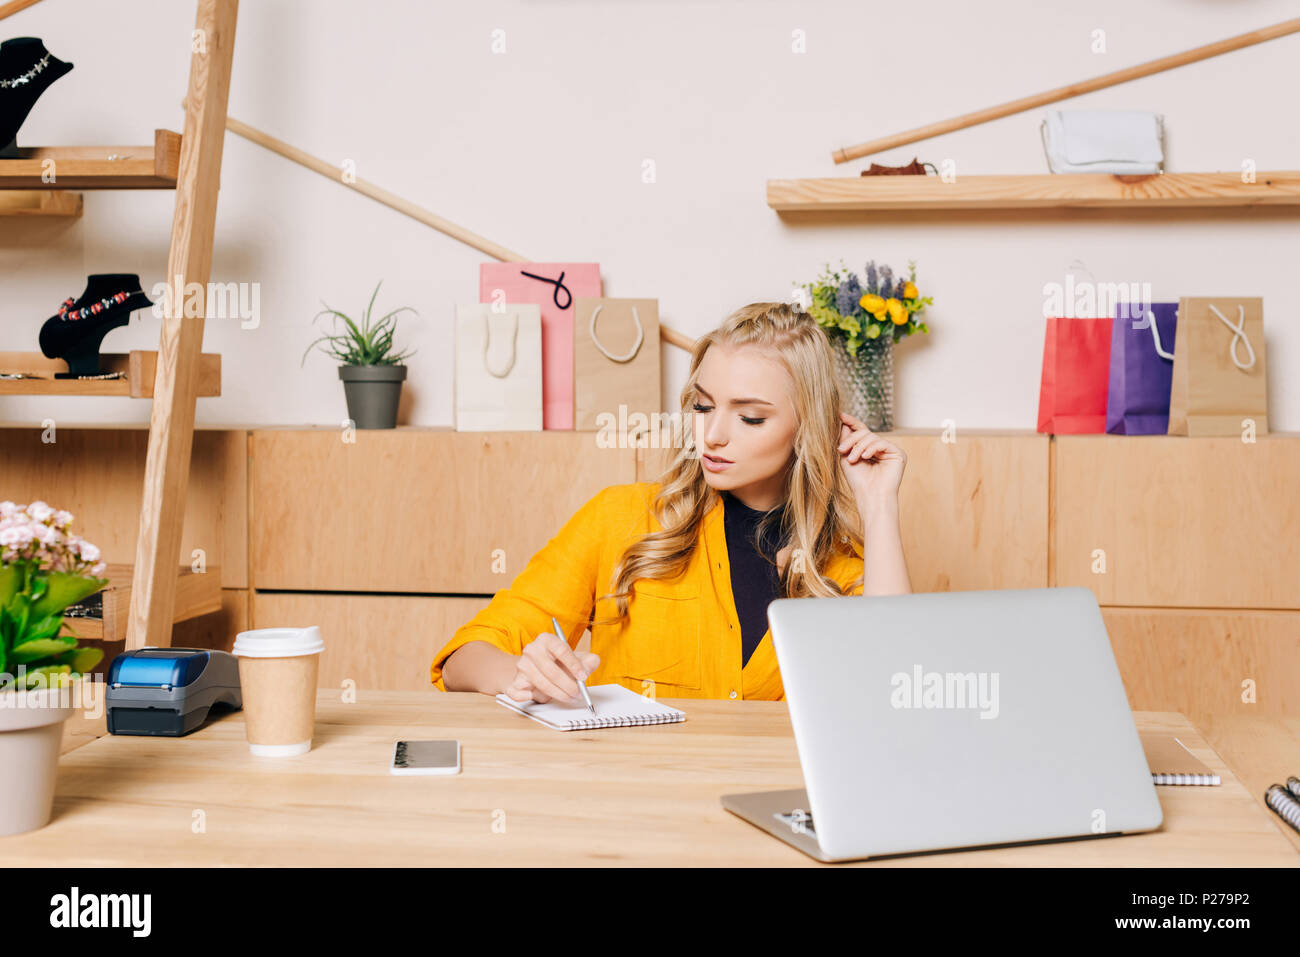 Clothing Store Manager Writing Notes At Workplace Stock Photo